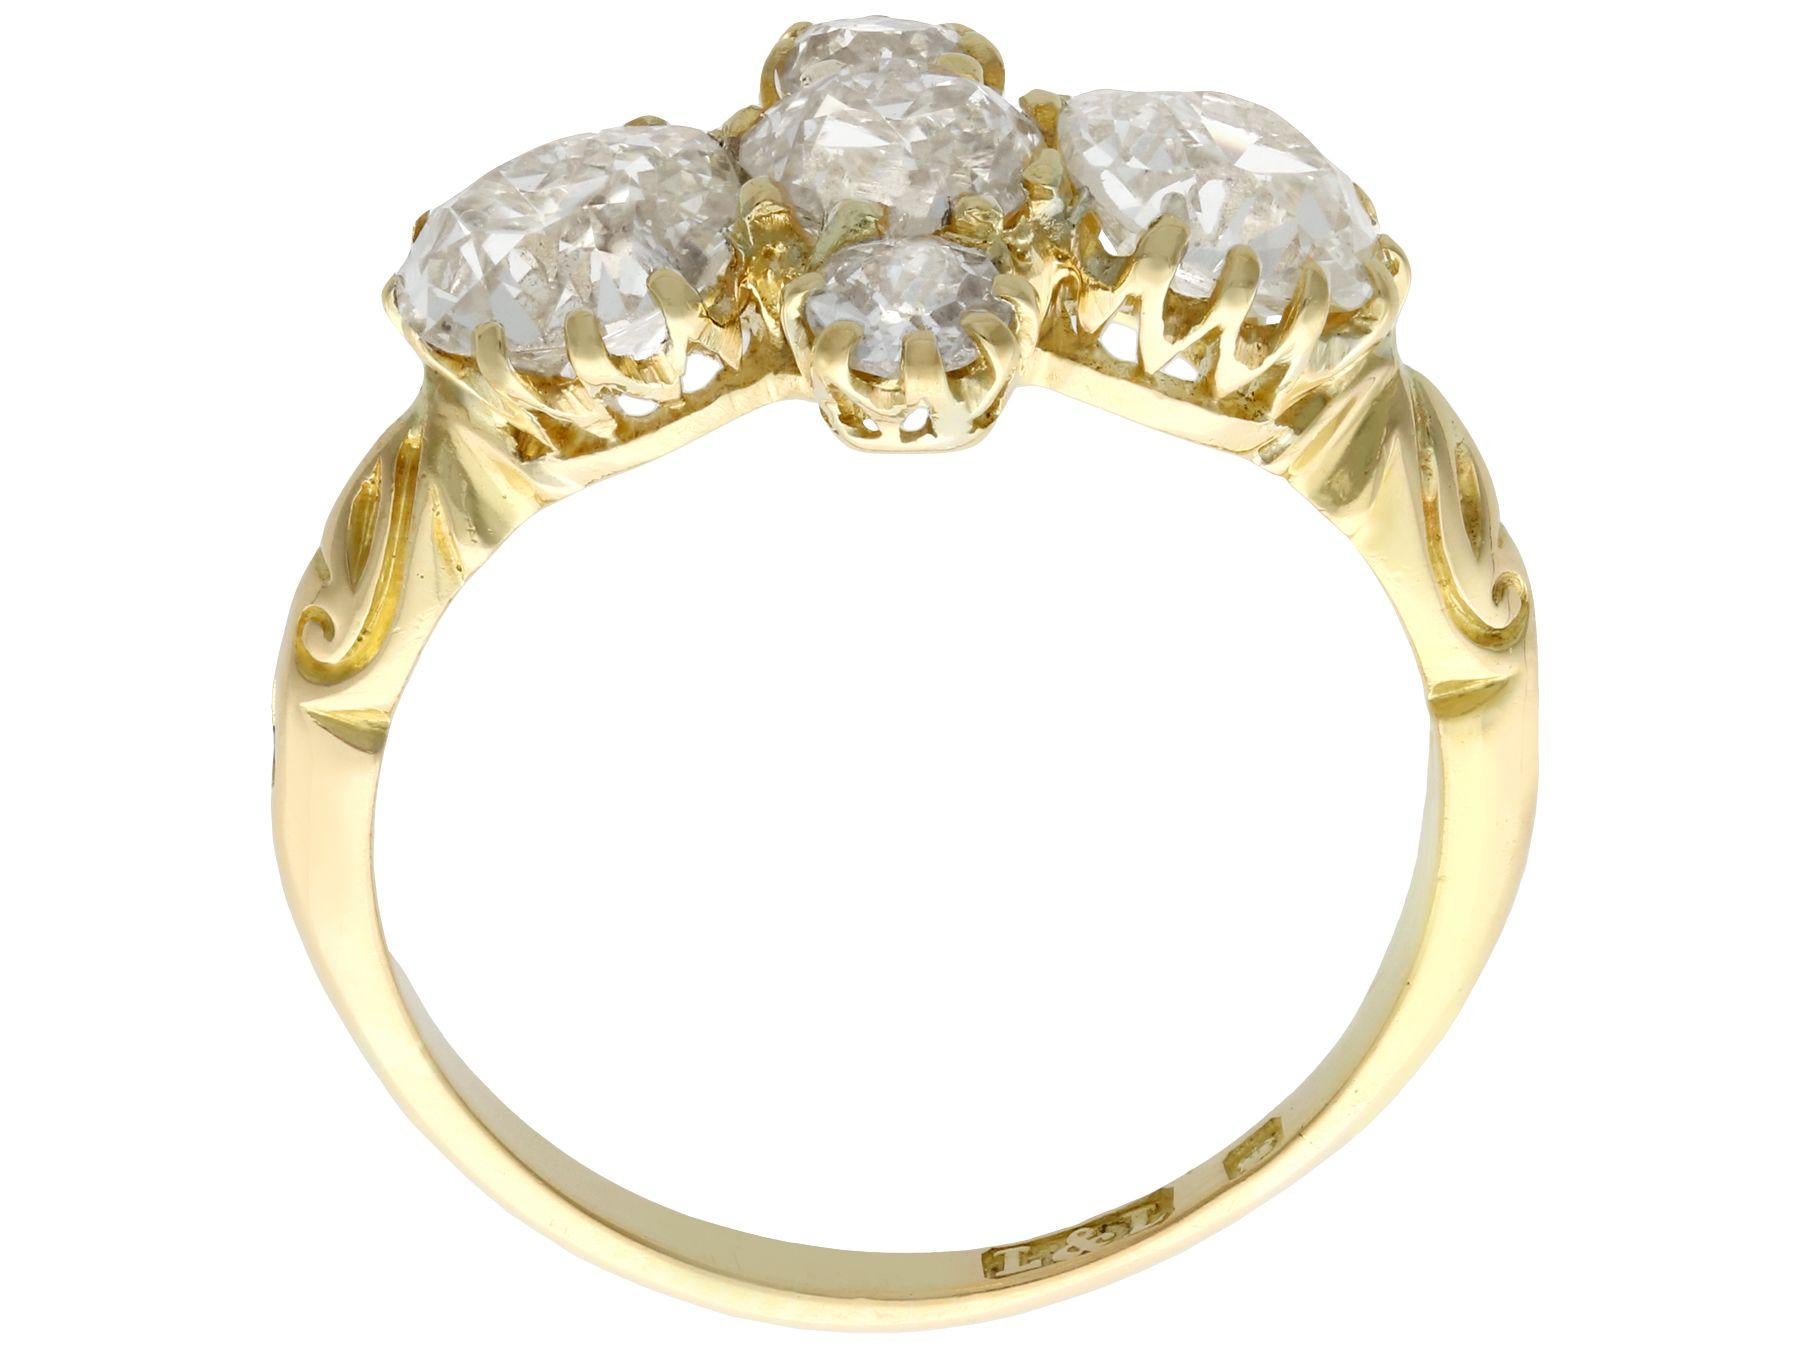 Old European Cut Antique Victorian Diamond and Yellow Gold Engagement Ring, Circa 1890